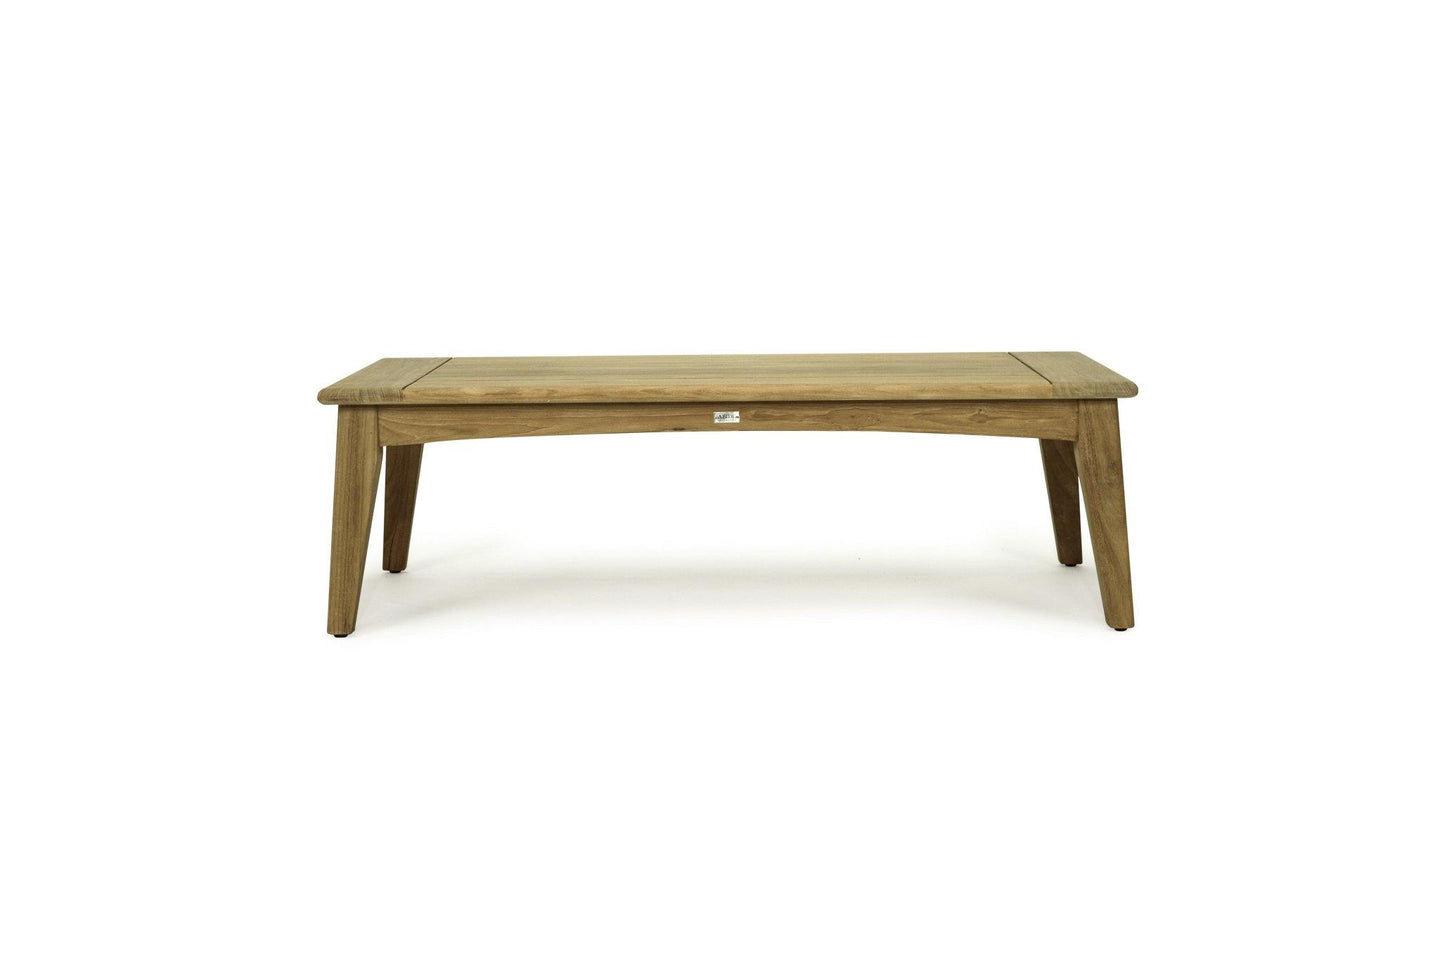 Lounge Styles Abide Interiors Maroochydore Outdoor Coffee Table – Rectangular